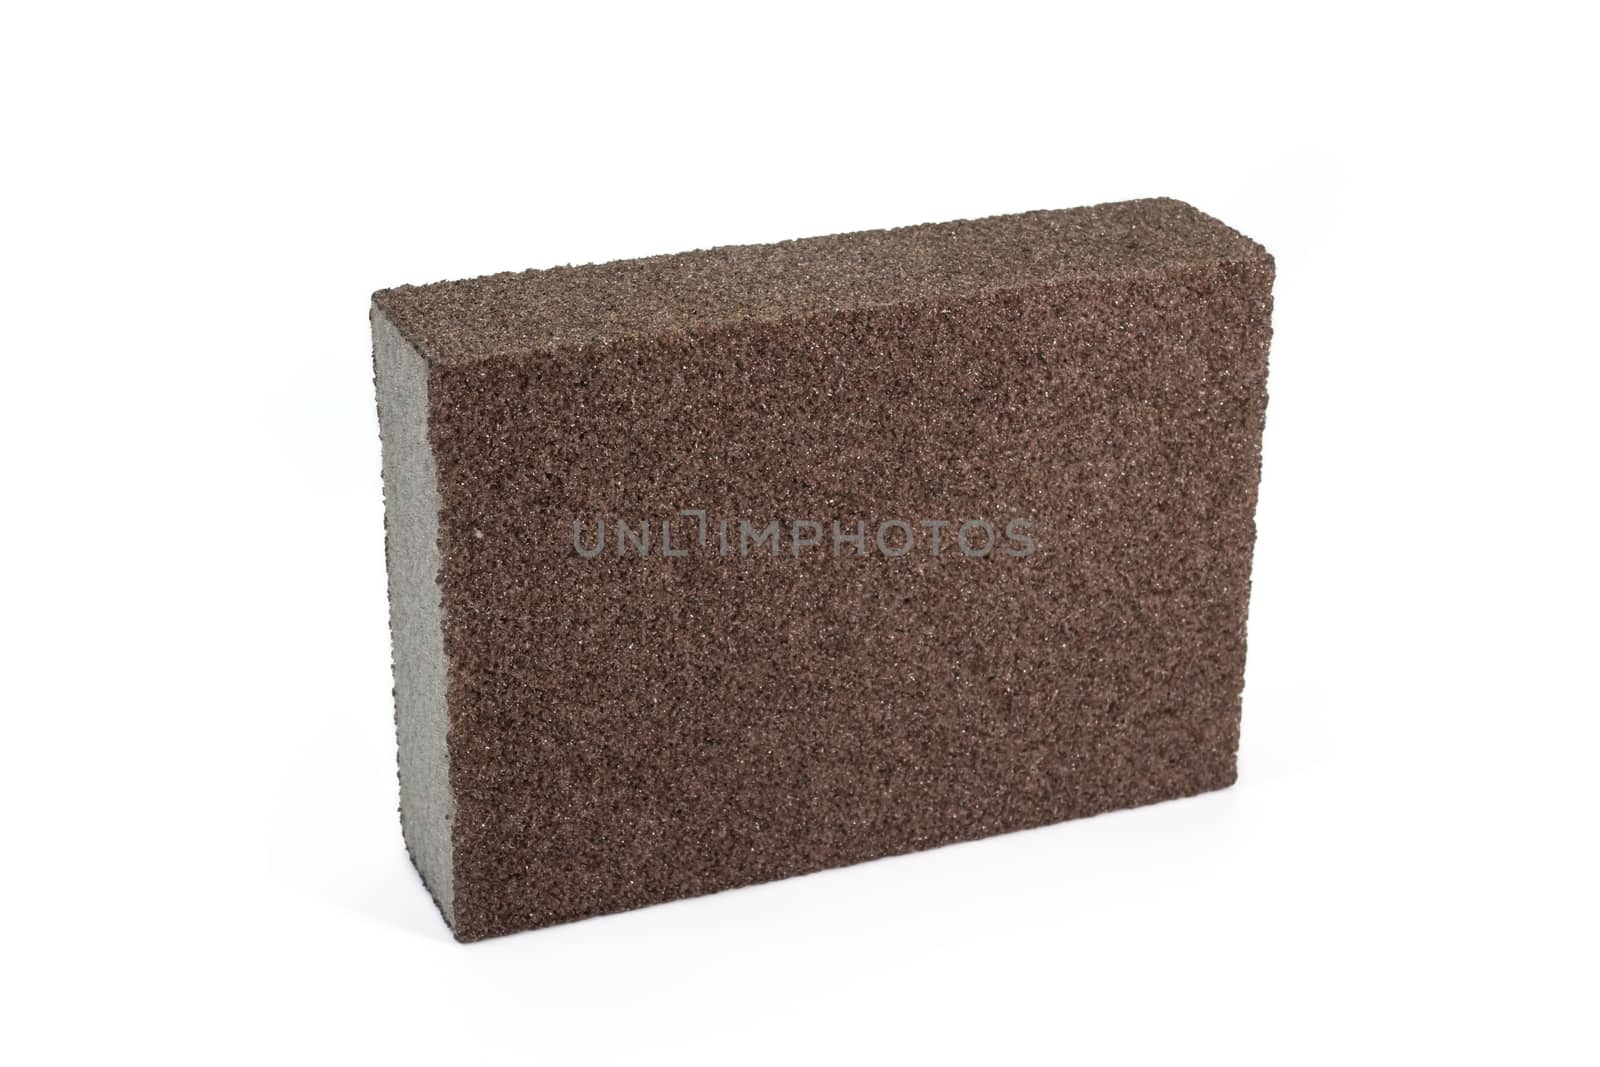 The close up of polishing sandpaper rough sponge block for kitchenware cleaning.